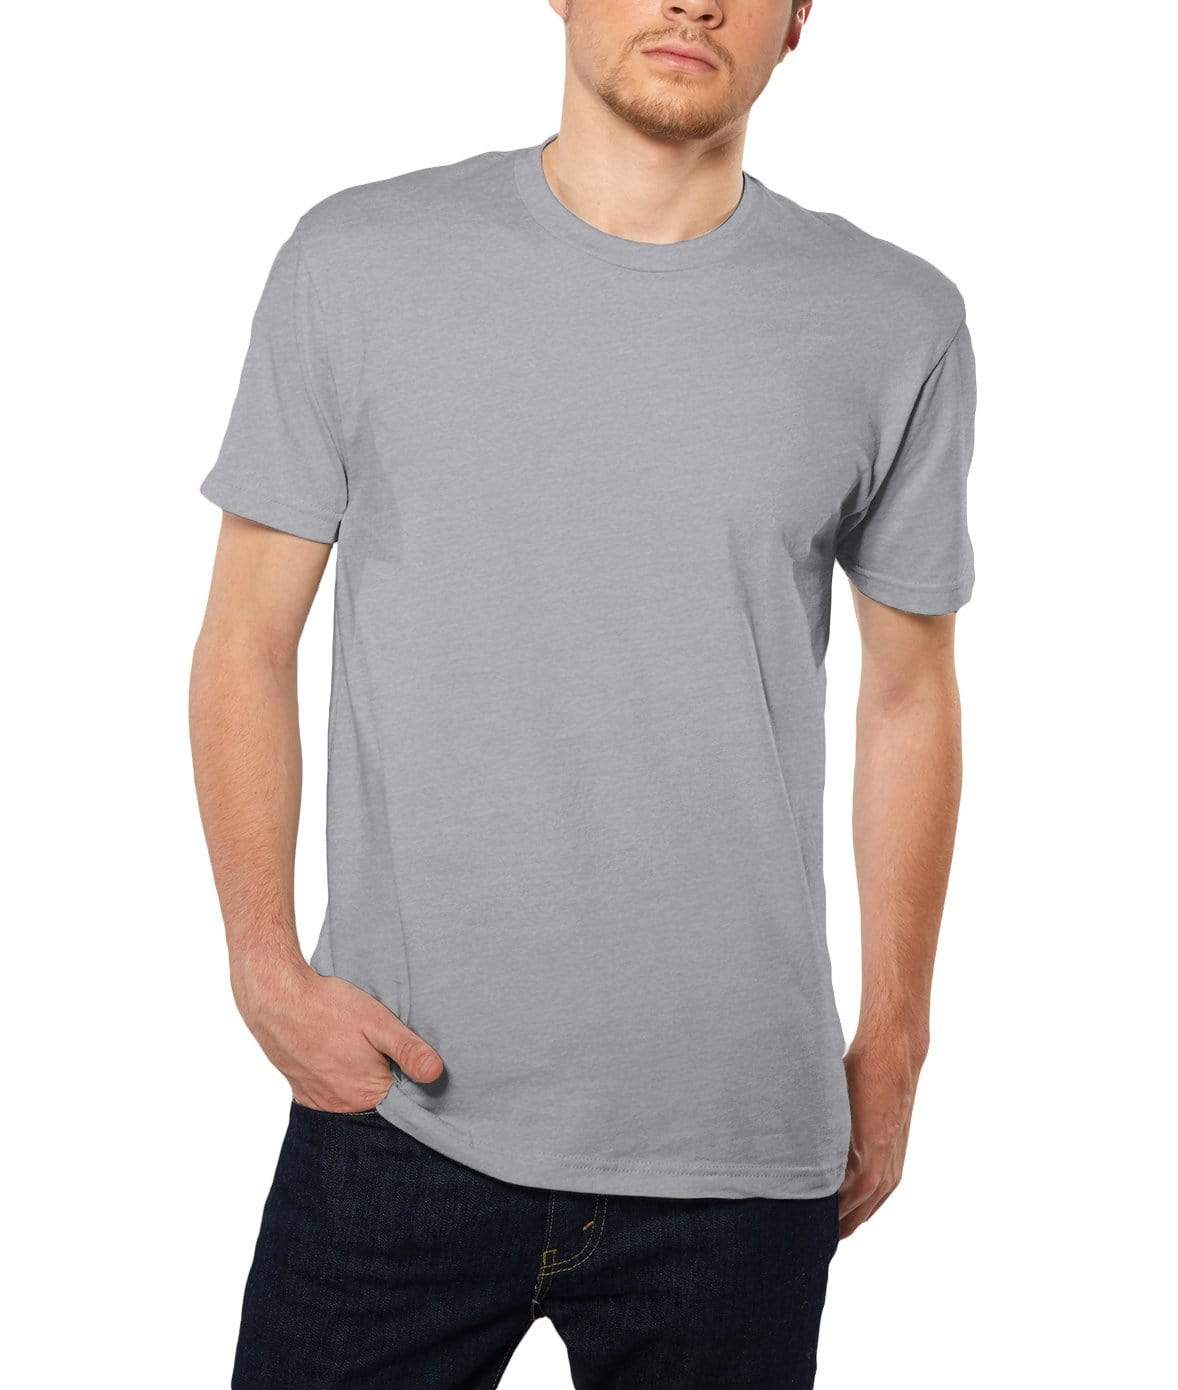 Ægte mild emne Mens Ridiculously Soft Short Sleeve Crew Neck 100% Cotton T-Shirt - Nayked  Apparel